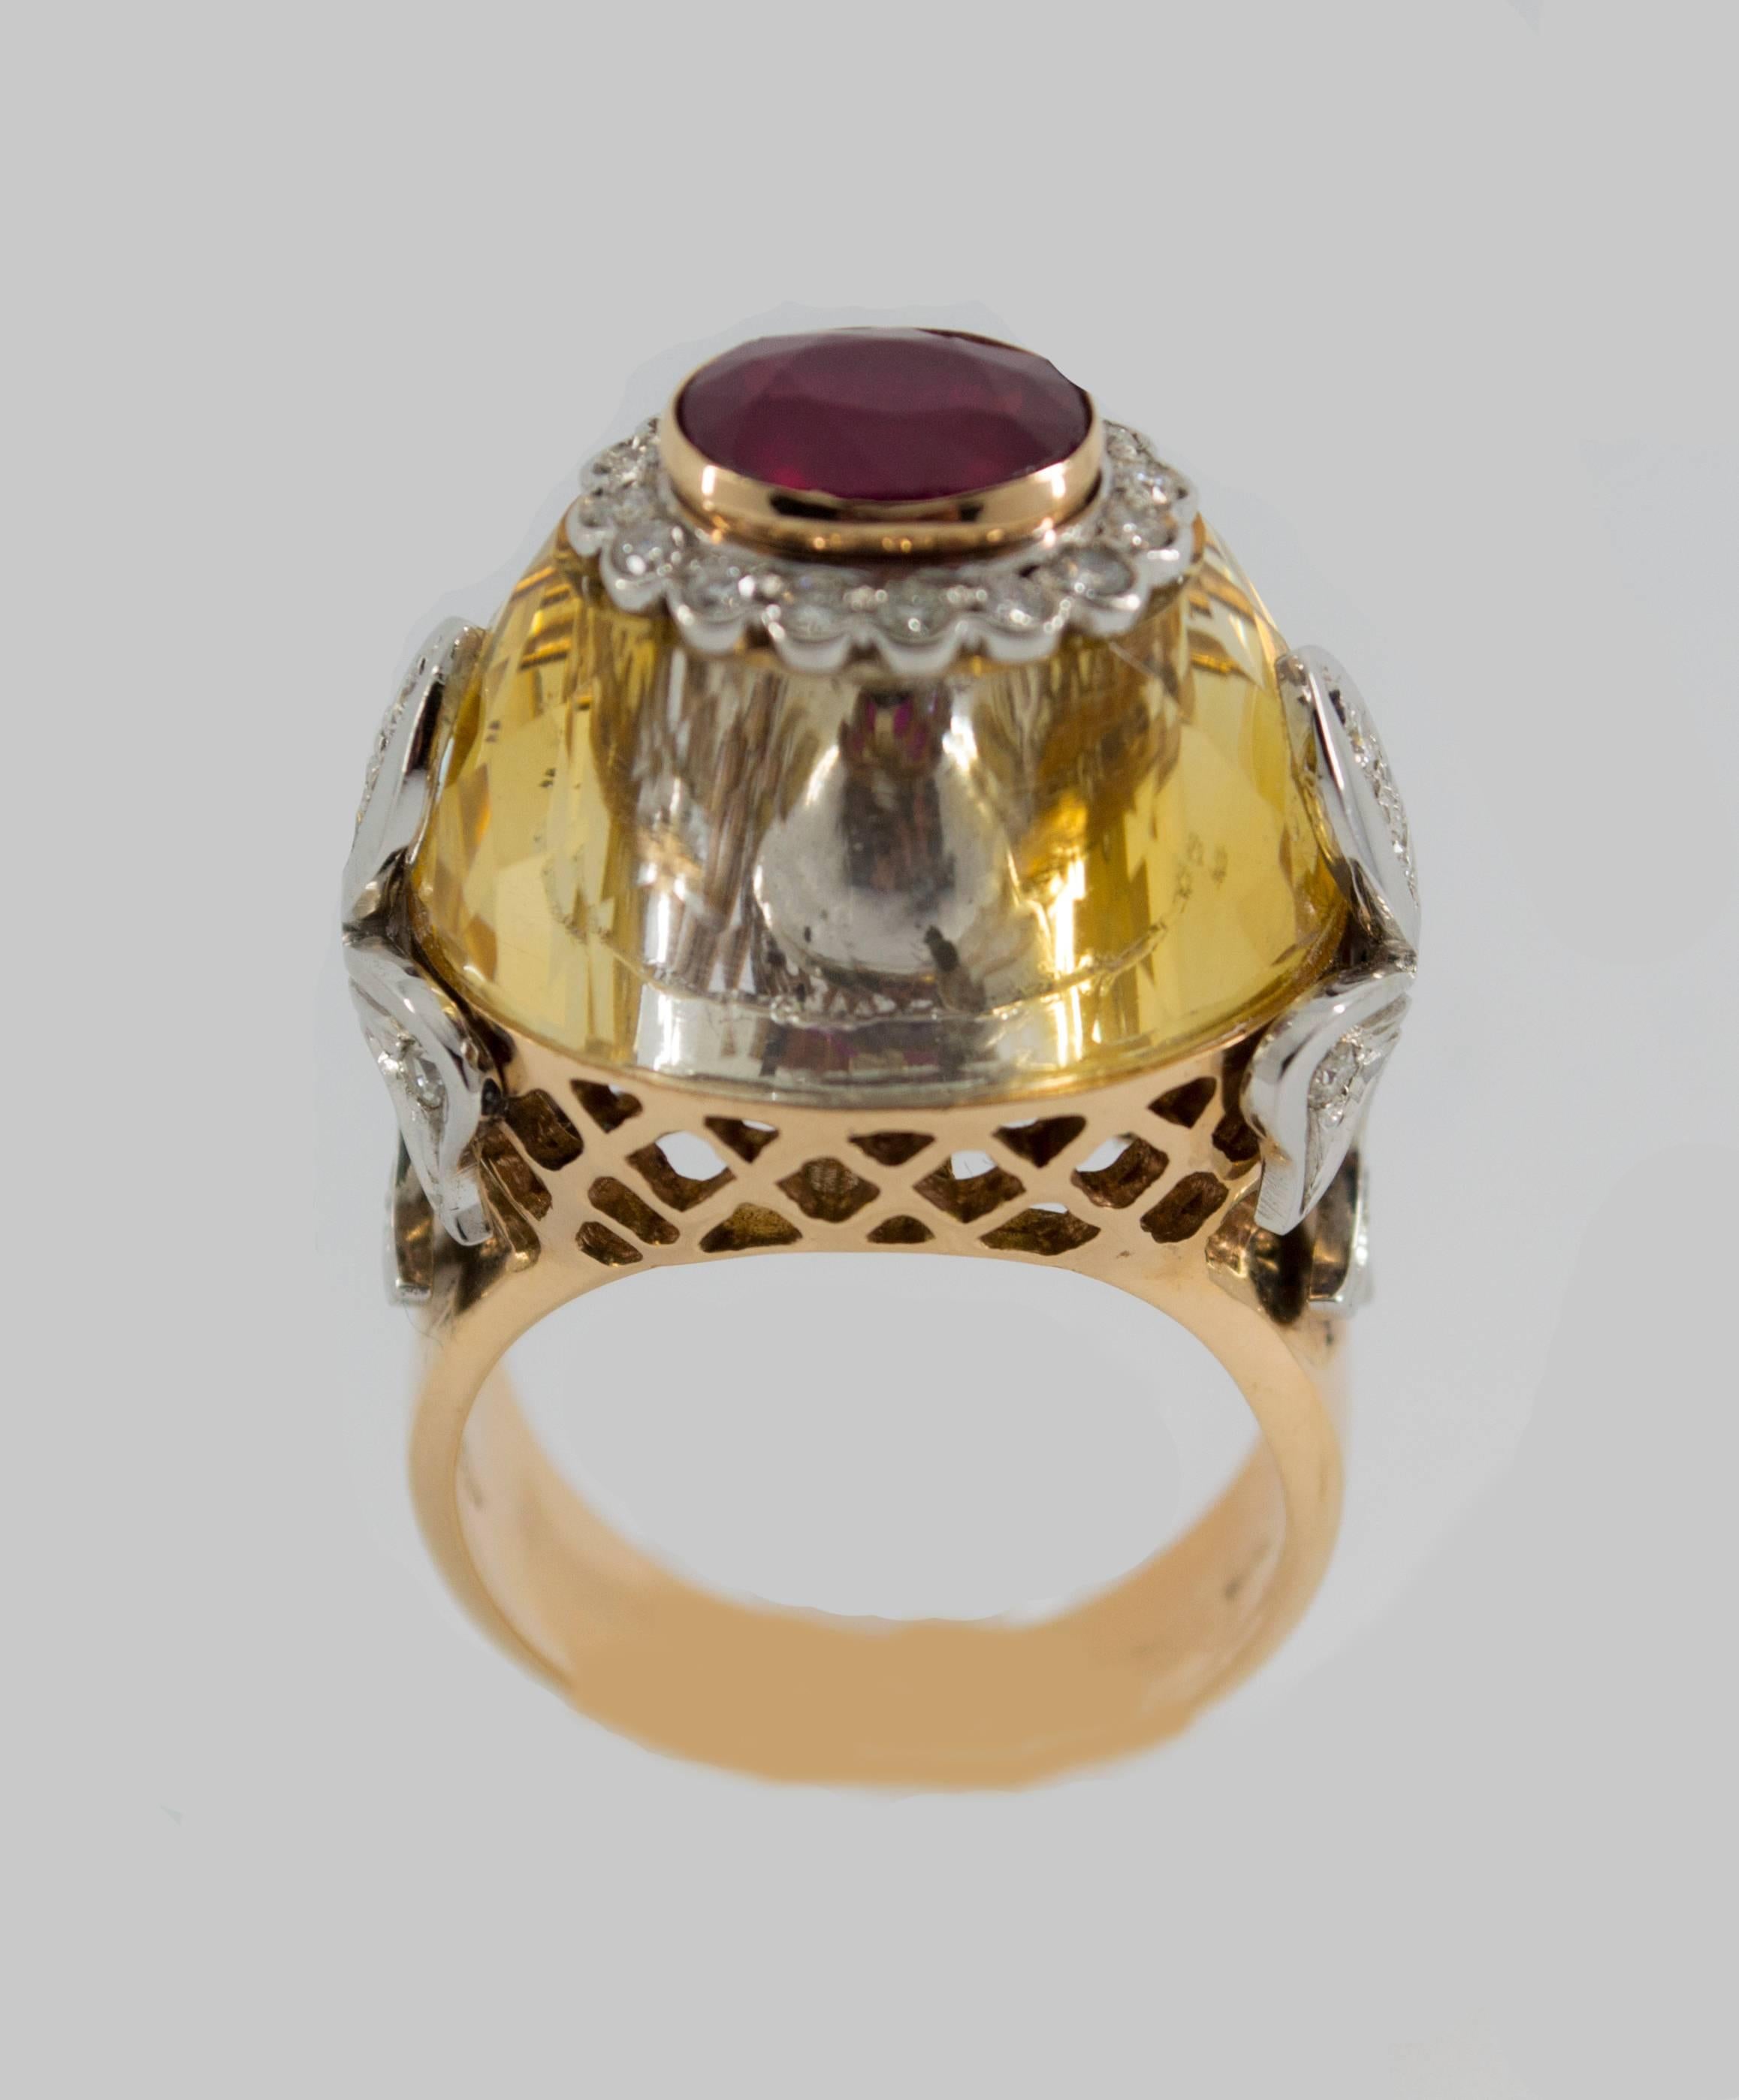 This ring is made of 14K Yellow Gold.
This ring has a 1.20 Carats Ruby.
This ring has 0.60 Carats of Diamonds.
Size ITA: 21 Size USA: 9.5
We're a workshop so every piece is handmade, customizable and resizable.